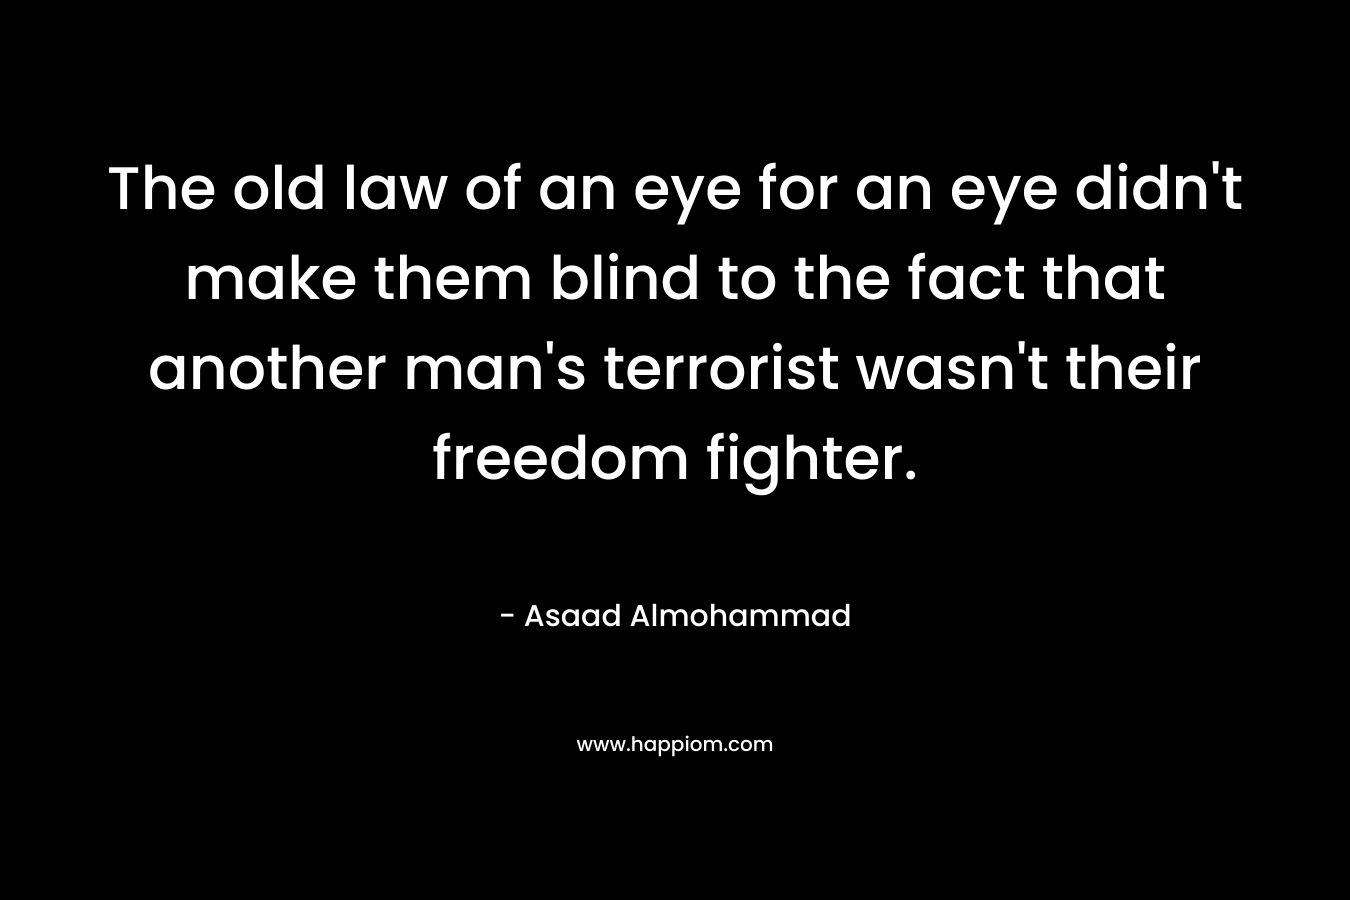 The old law of an eye for an eye didn't make them blind to the fact that another man's terrorist wasn't their freedom fighter.